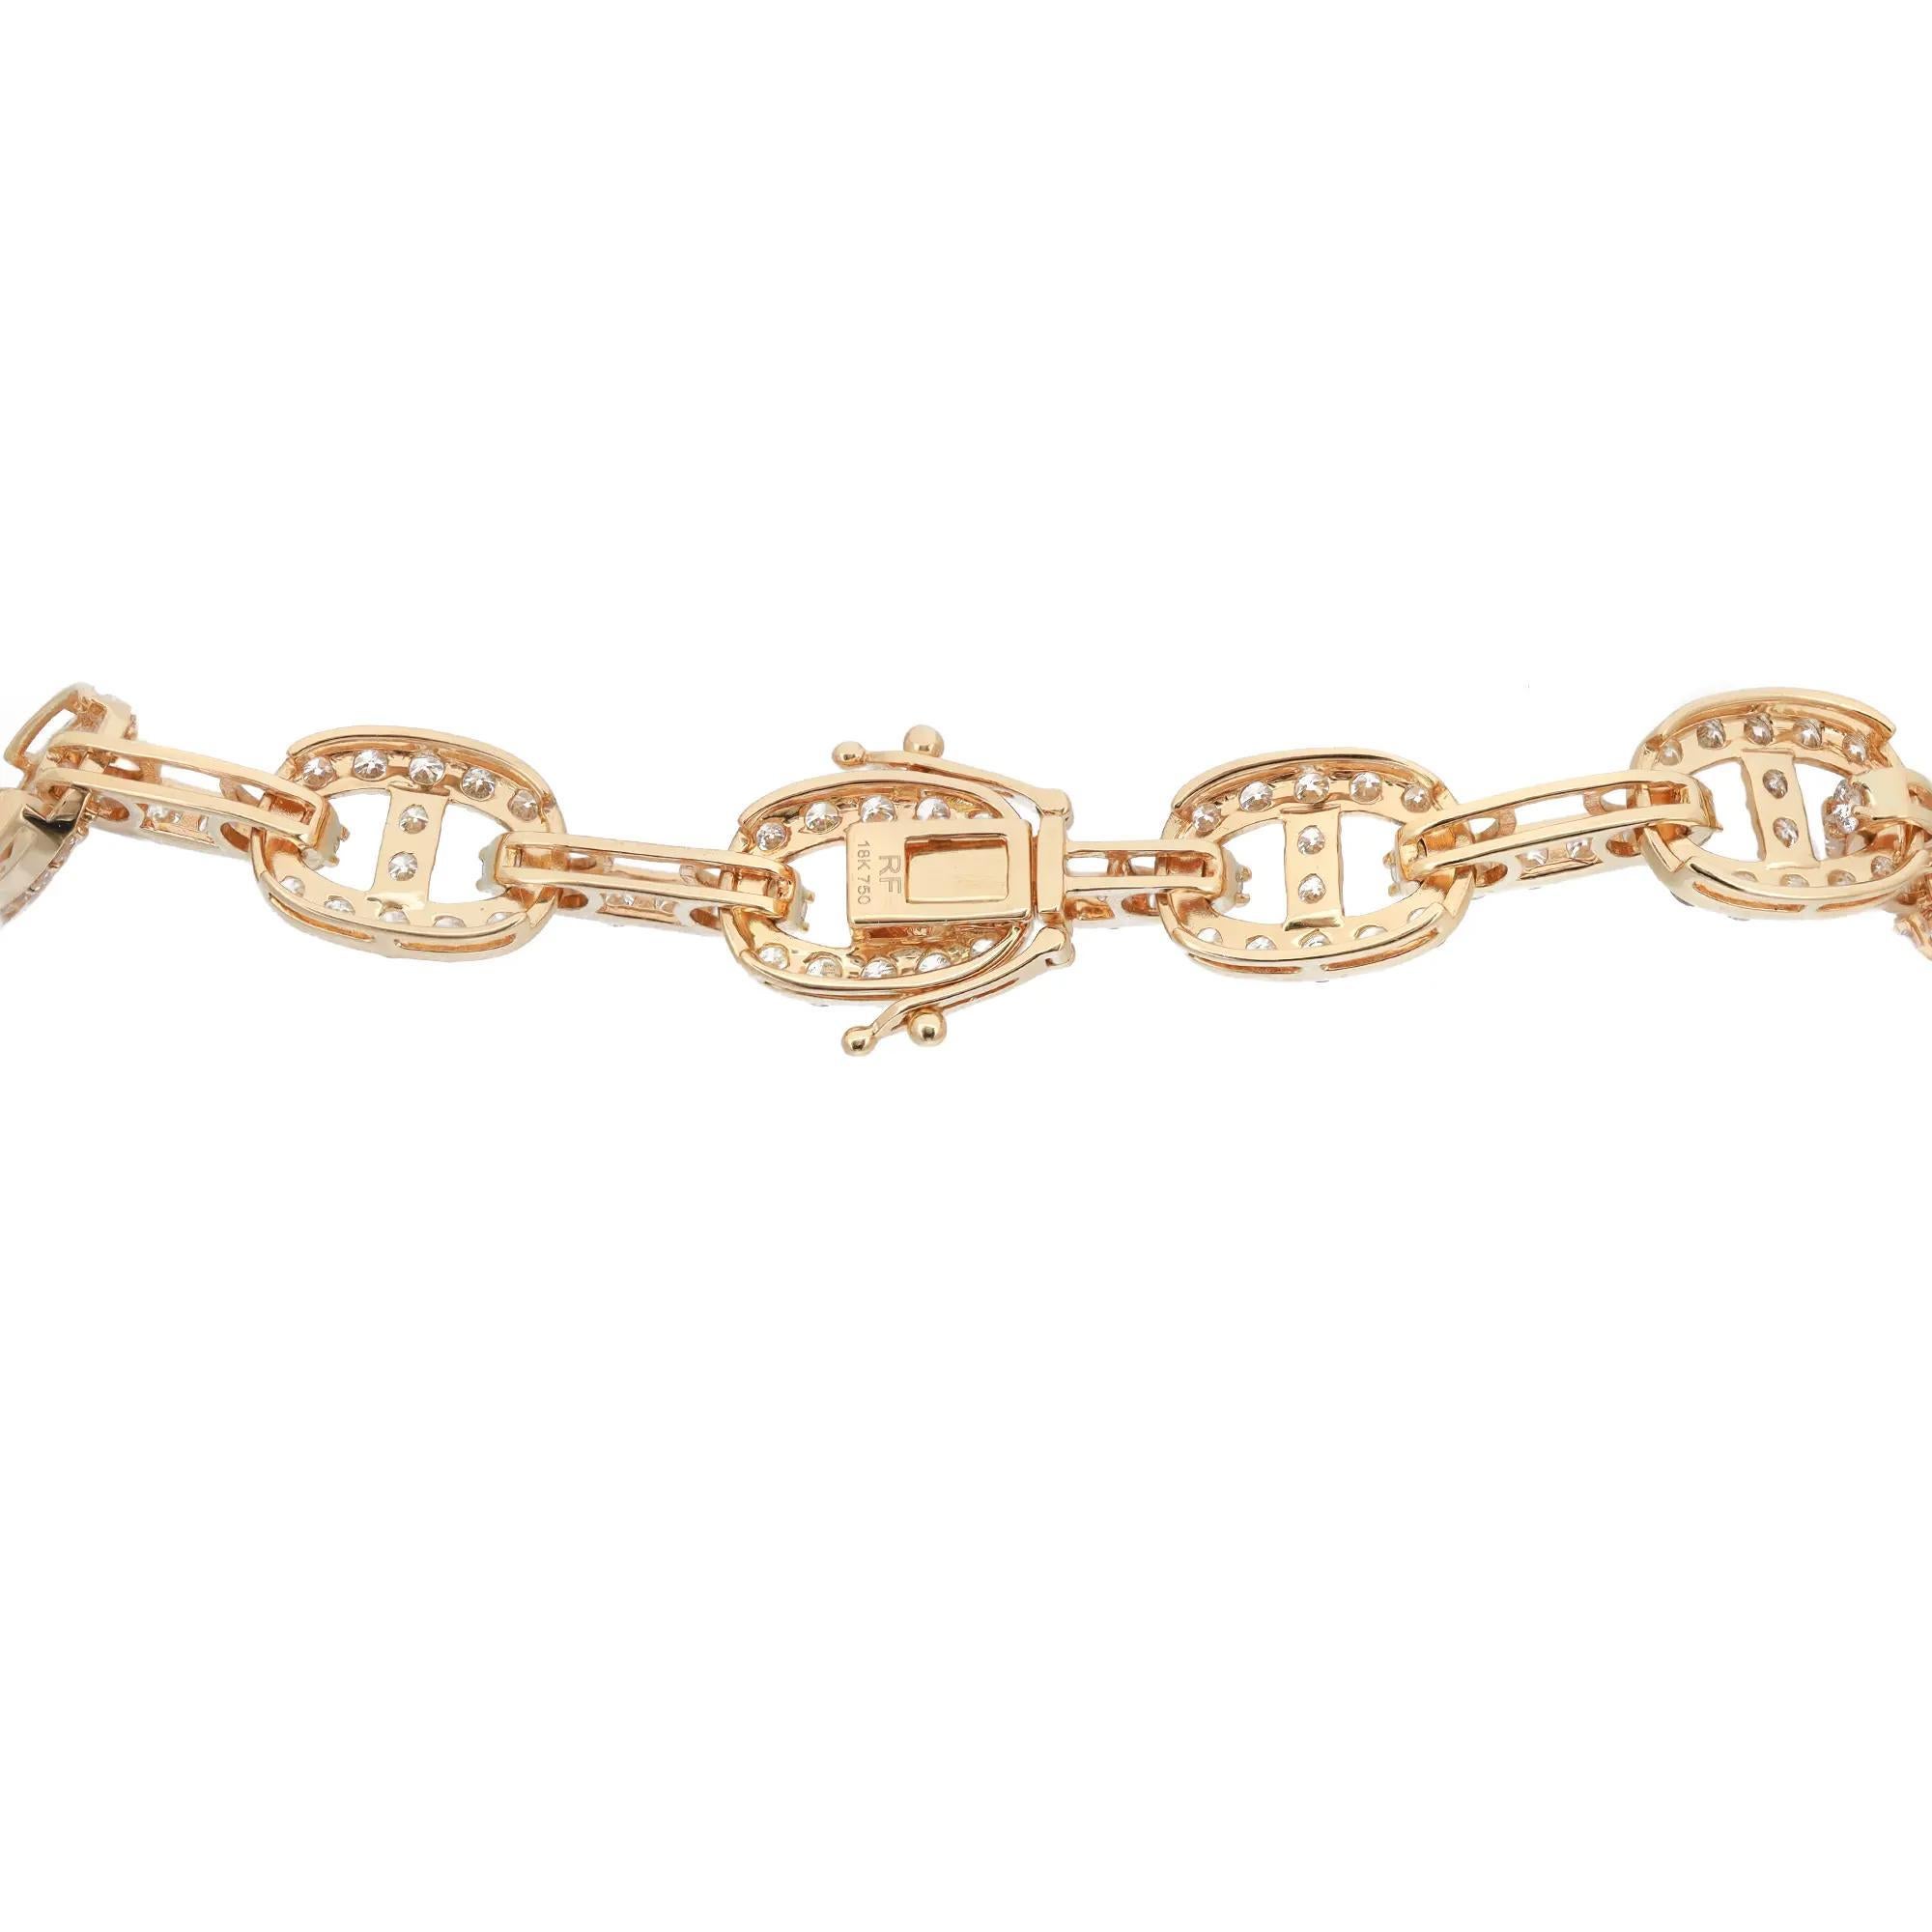 Women's Round Cut Diamond Link Chain Neckalce 18K Yellow Gold 14.95Cttw 17.5 Inches For Sale